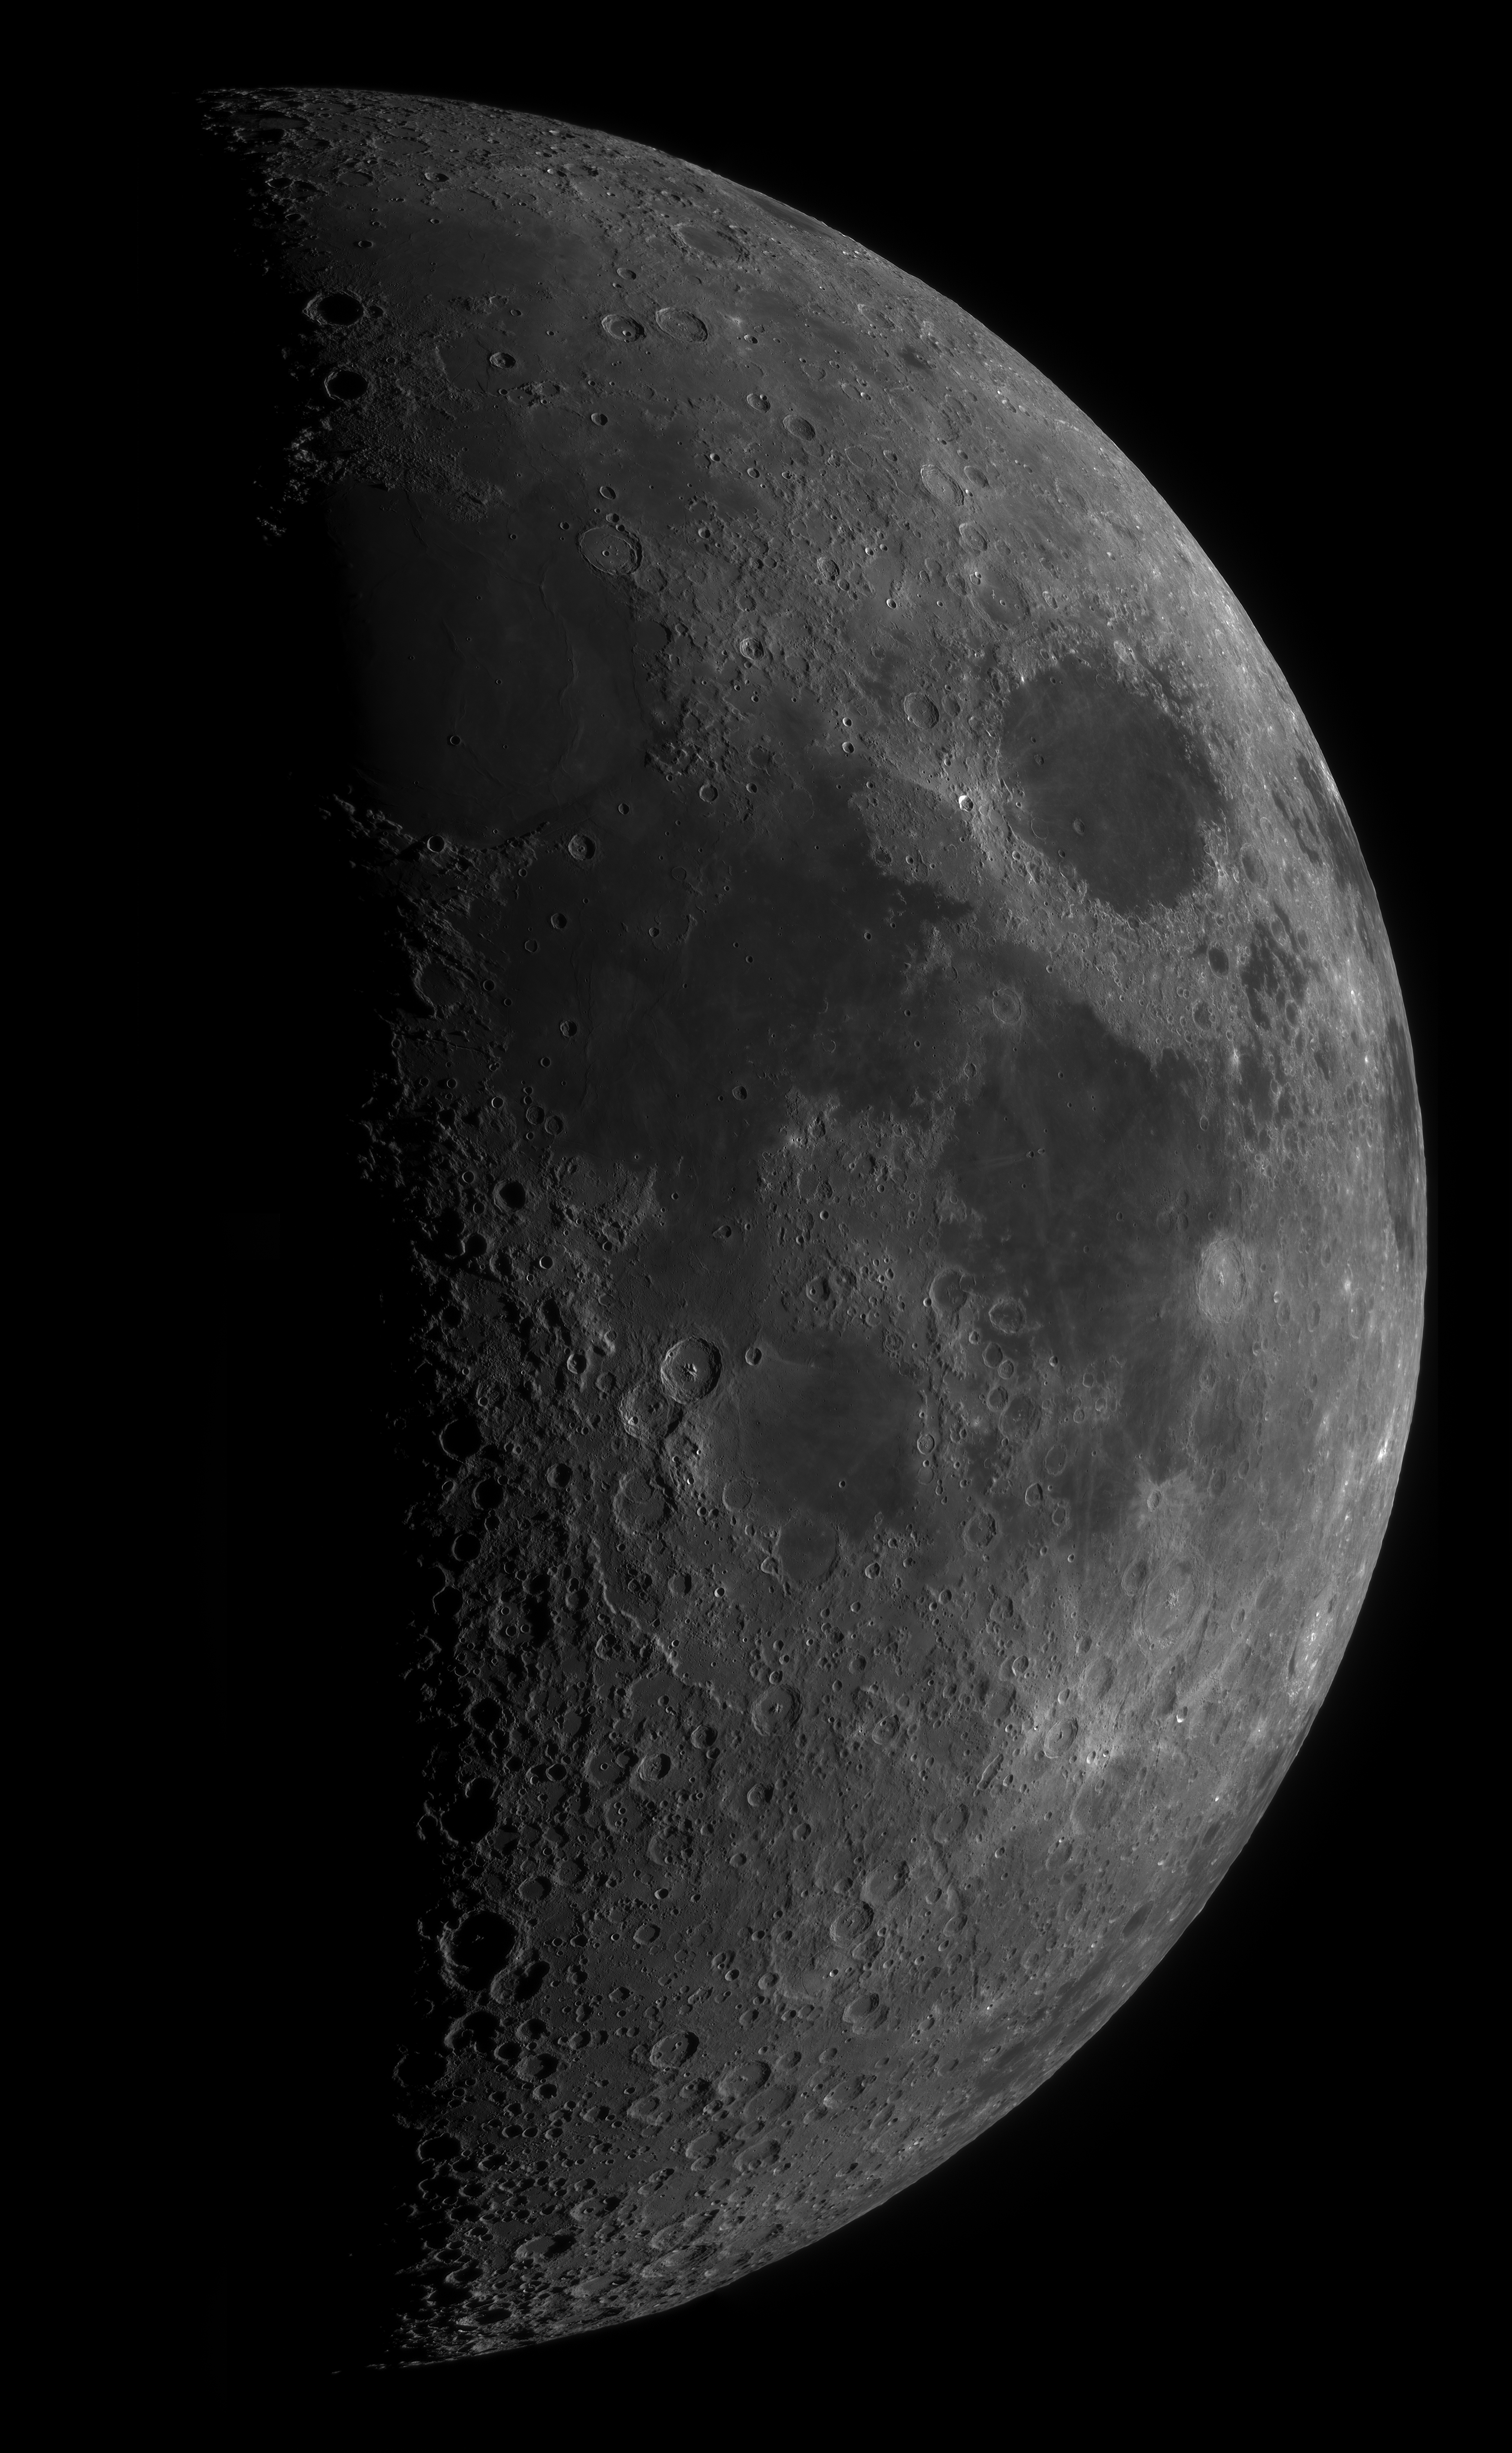 Mosaic of half moon by Alan Clitherow 26th February 2023